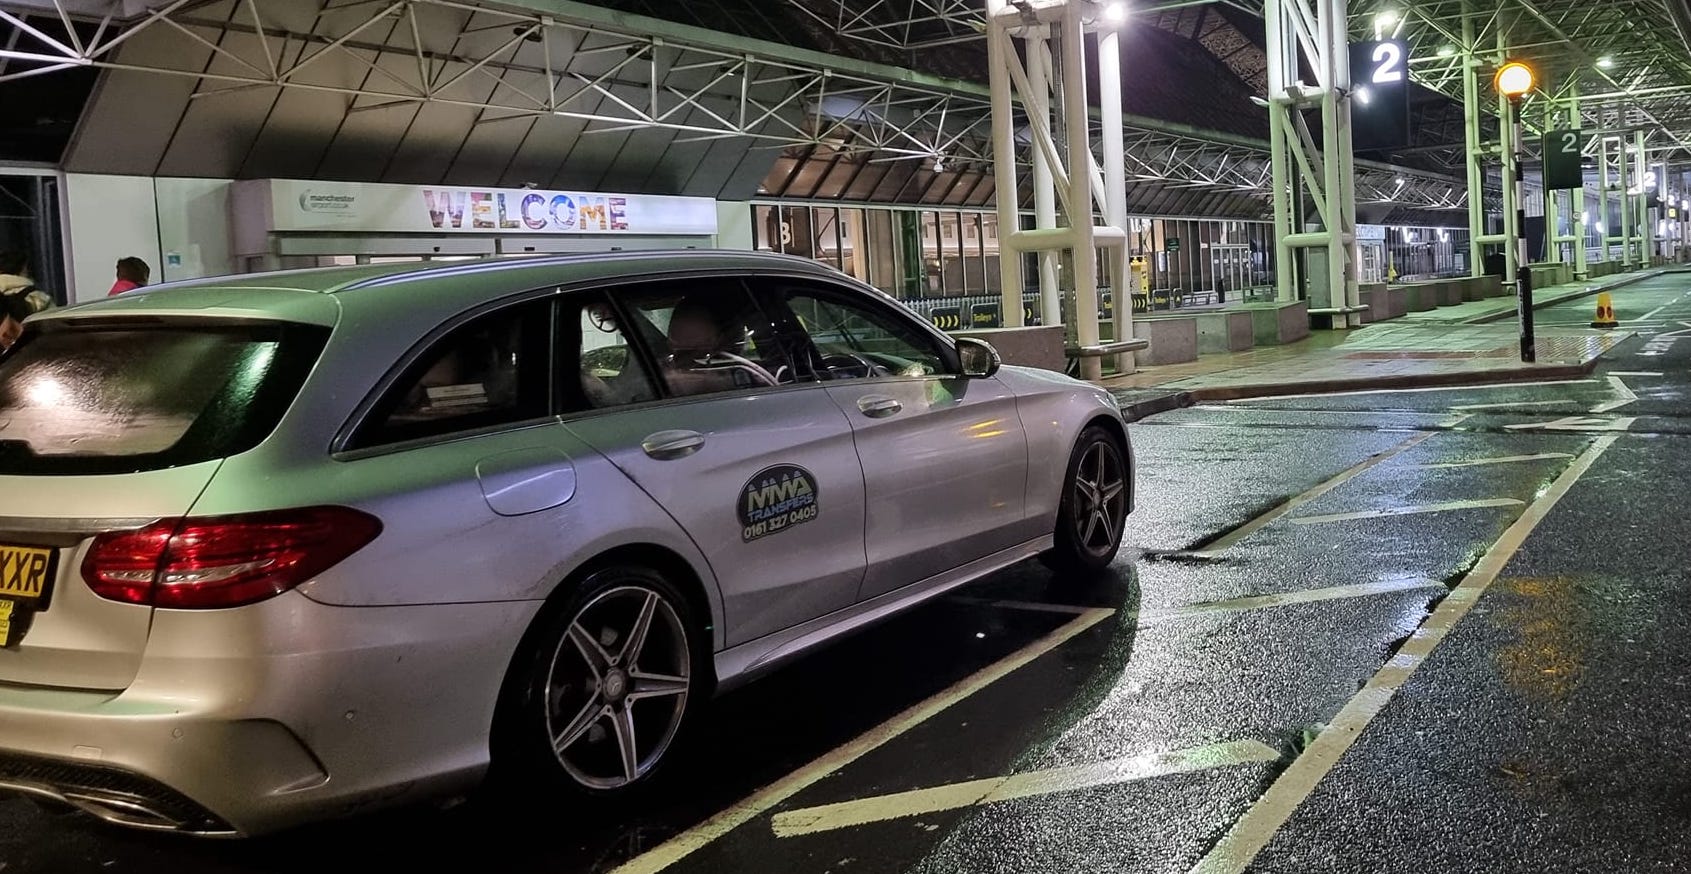 Take a Taxi from Manchester Airport to Hull with a free Meet and Greet Service